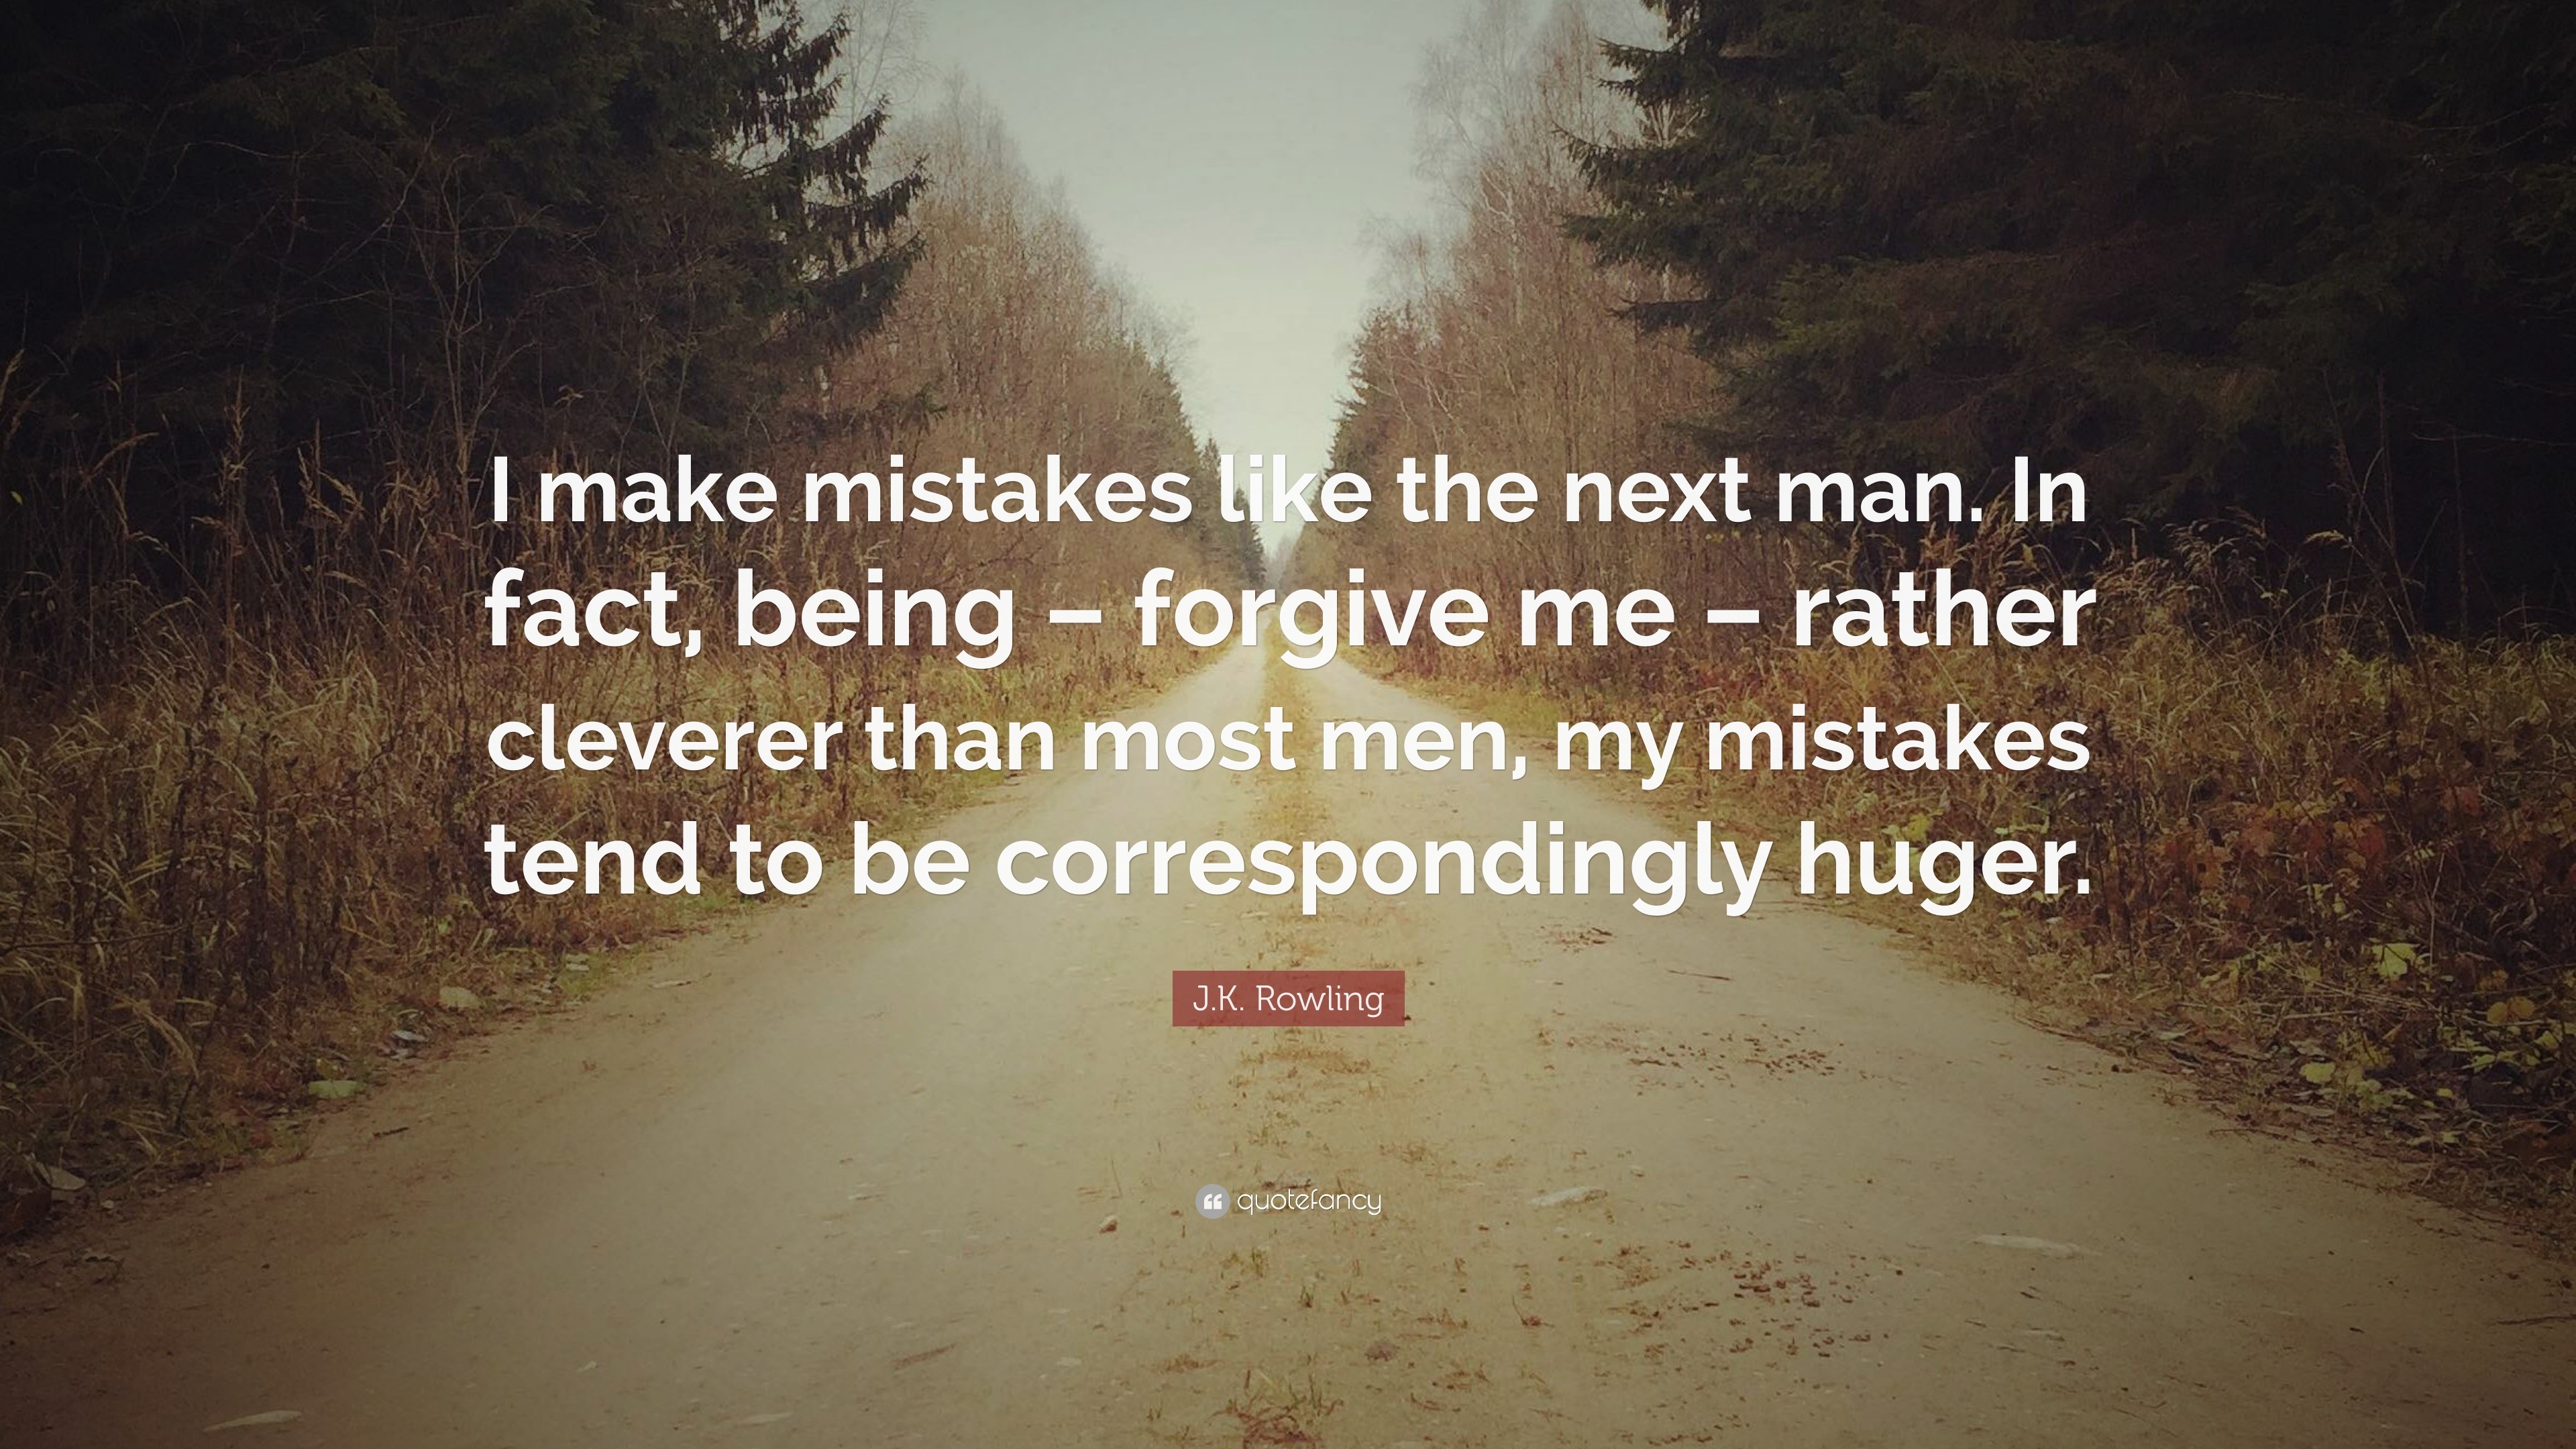 J.K. Rowling Quote: “I make mistakes like the next man. In fact